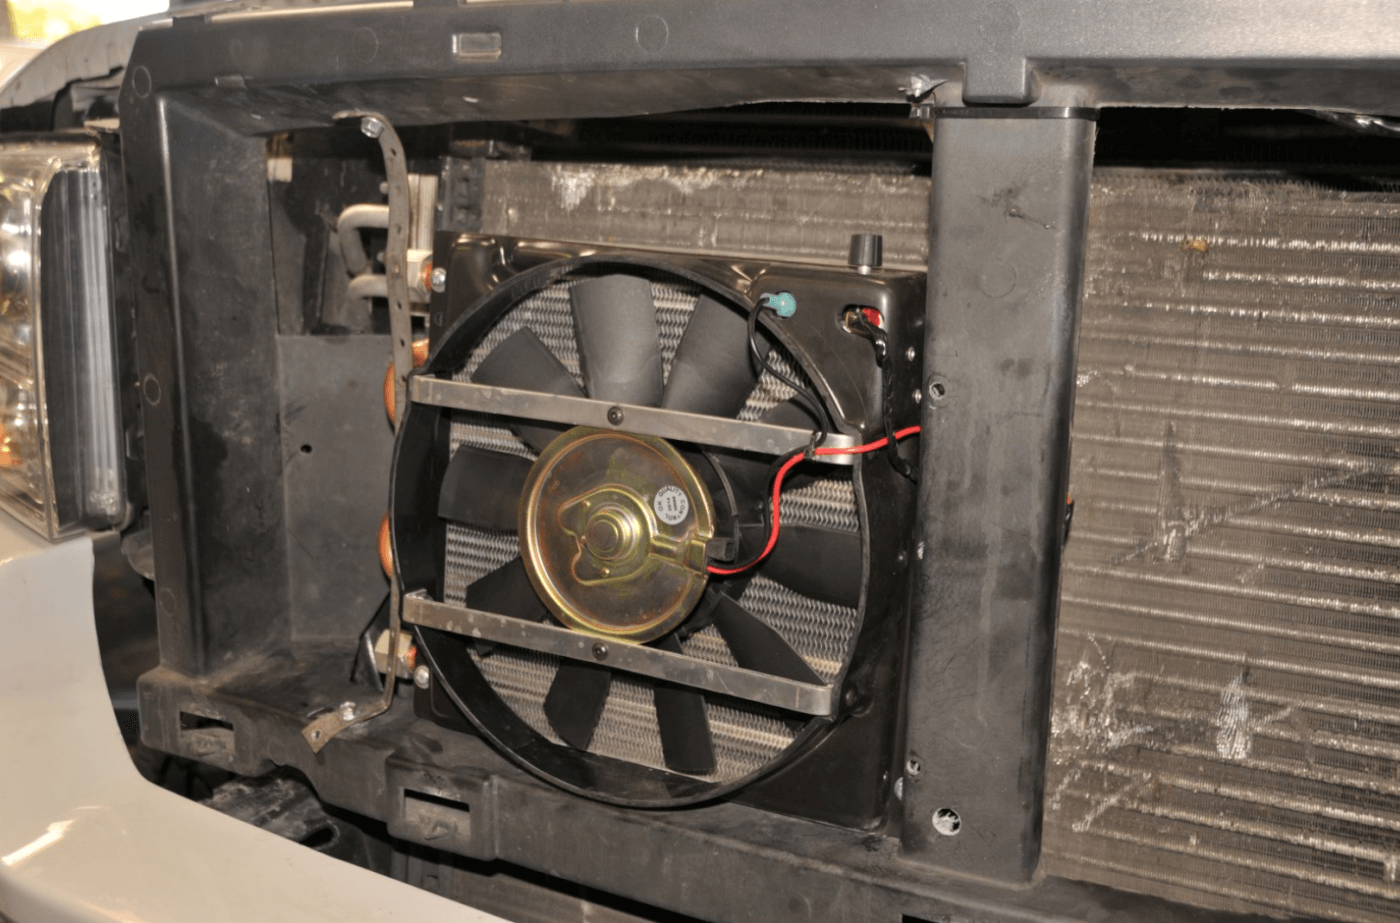 15. Next came the Flex-a-Lite Transmission Cooler. After removing the factory grille to gain access the cooler/fan combo was mounted right in front of the radiator with some straps. The cooler can be mounted anywhere and the fan can run in either direction.